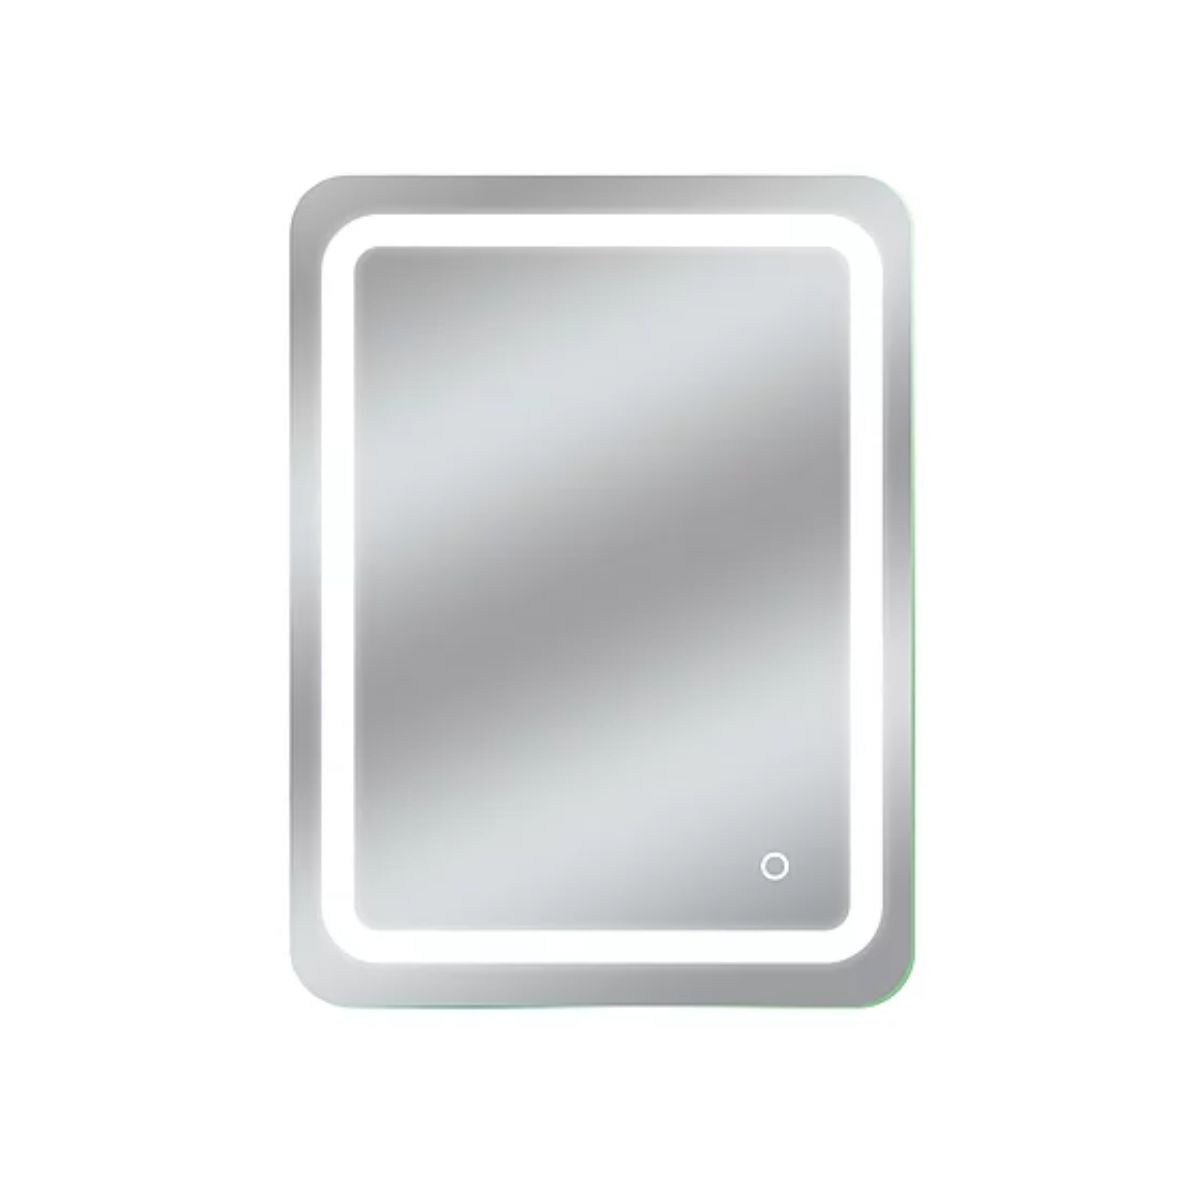 Egret 24 in. x 34 in. LED Wall Mirror with Touch On/Off Dimmer Function